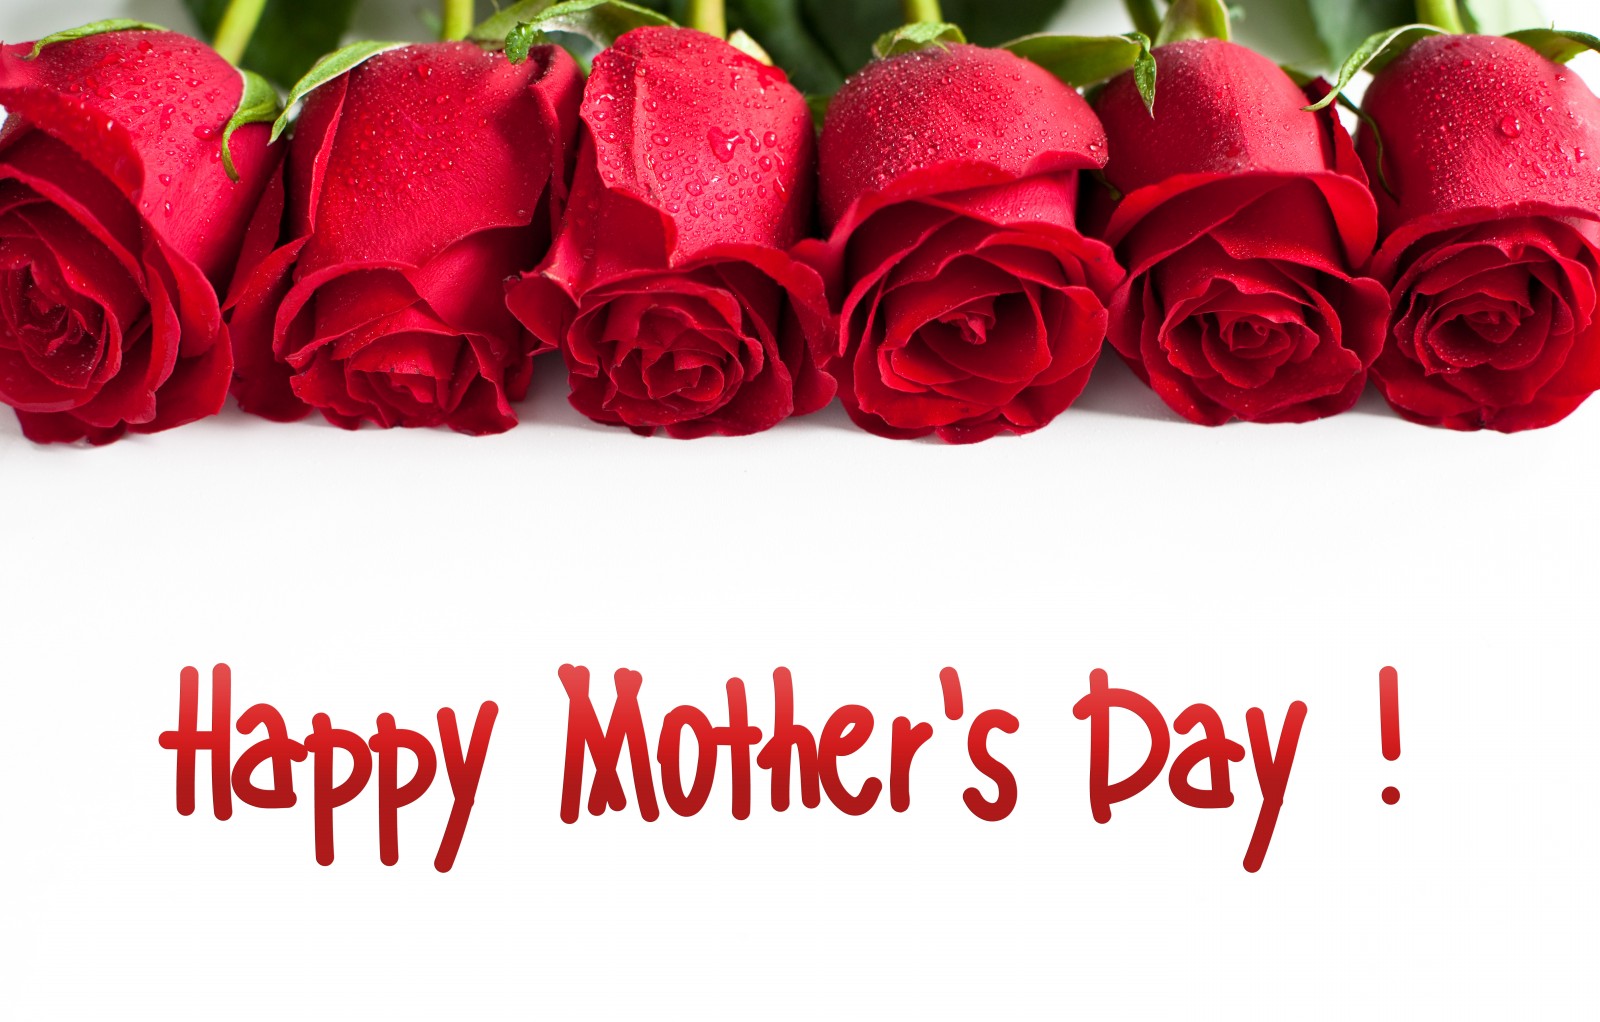 Free download Happy Mothers Day images for WhatsApp Wish Mothers day